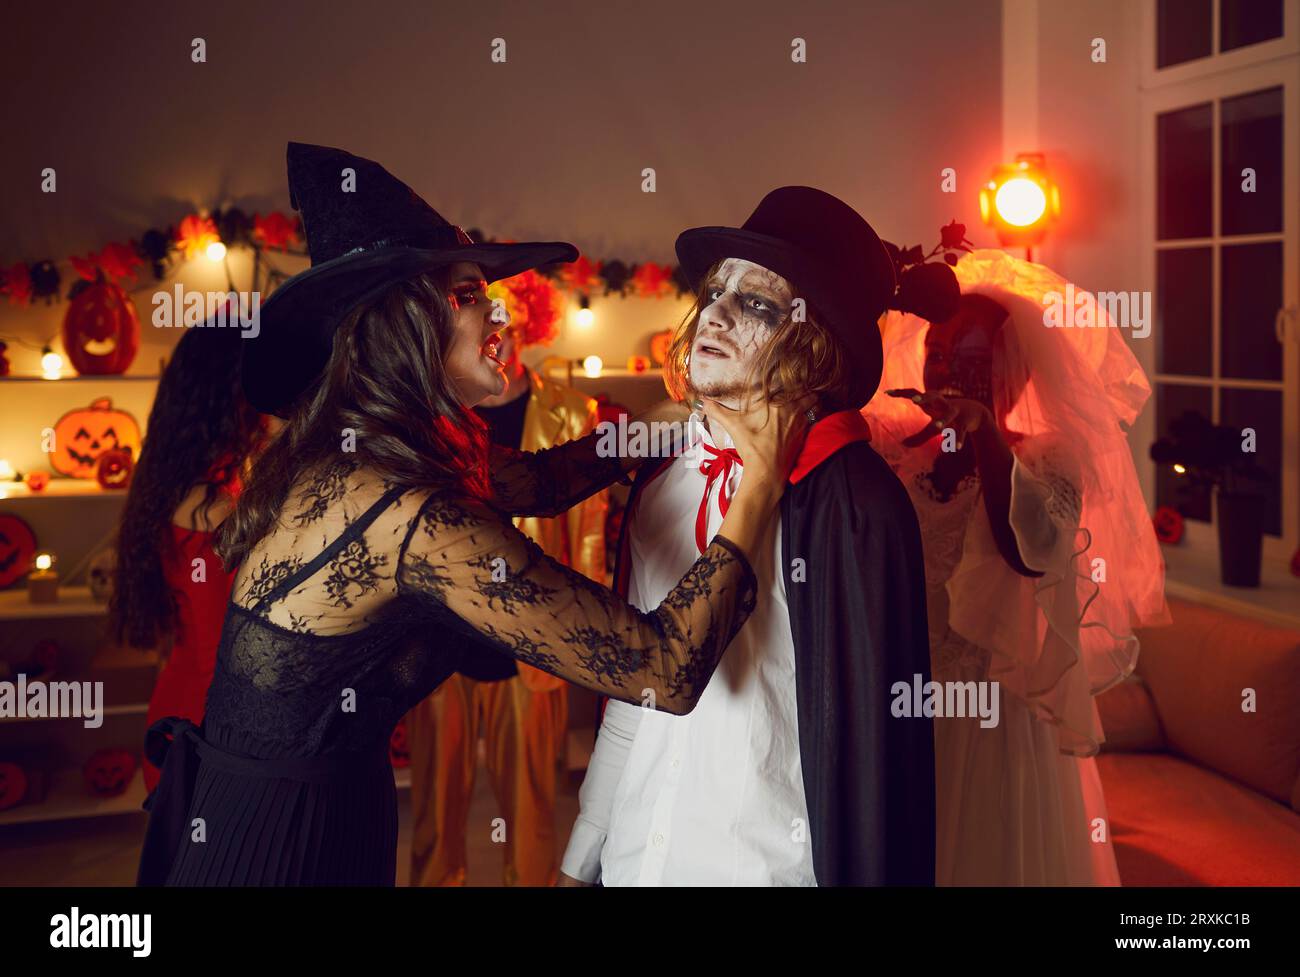 Scary woman and man in costumes have fun on Halloween Stock Photo